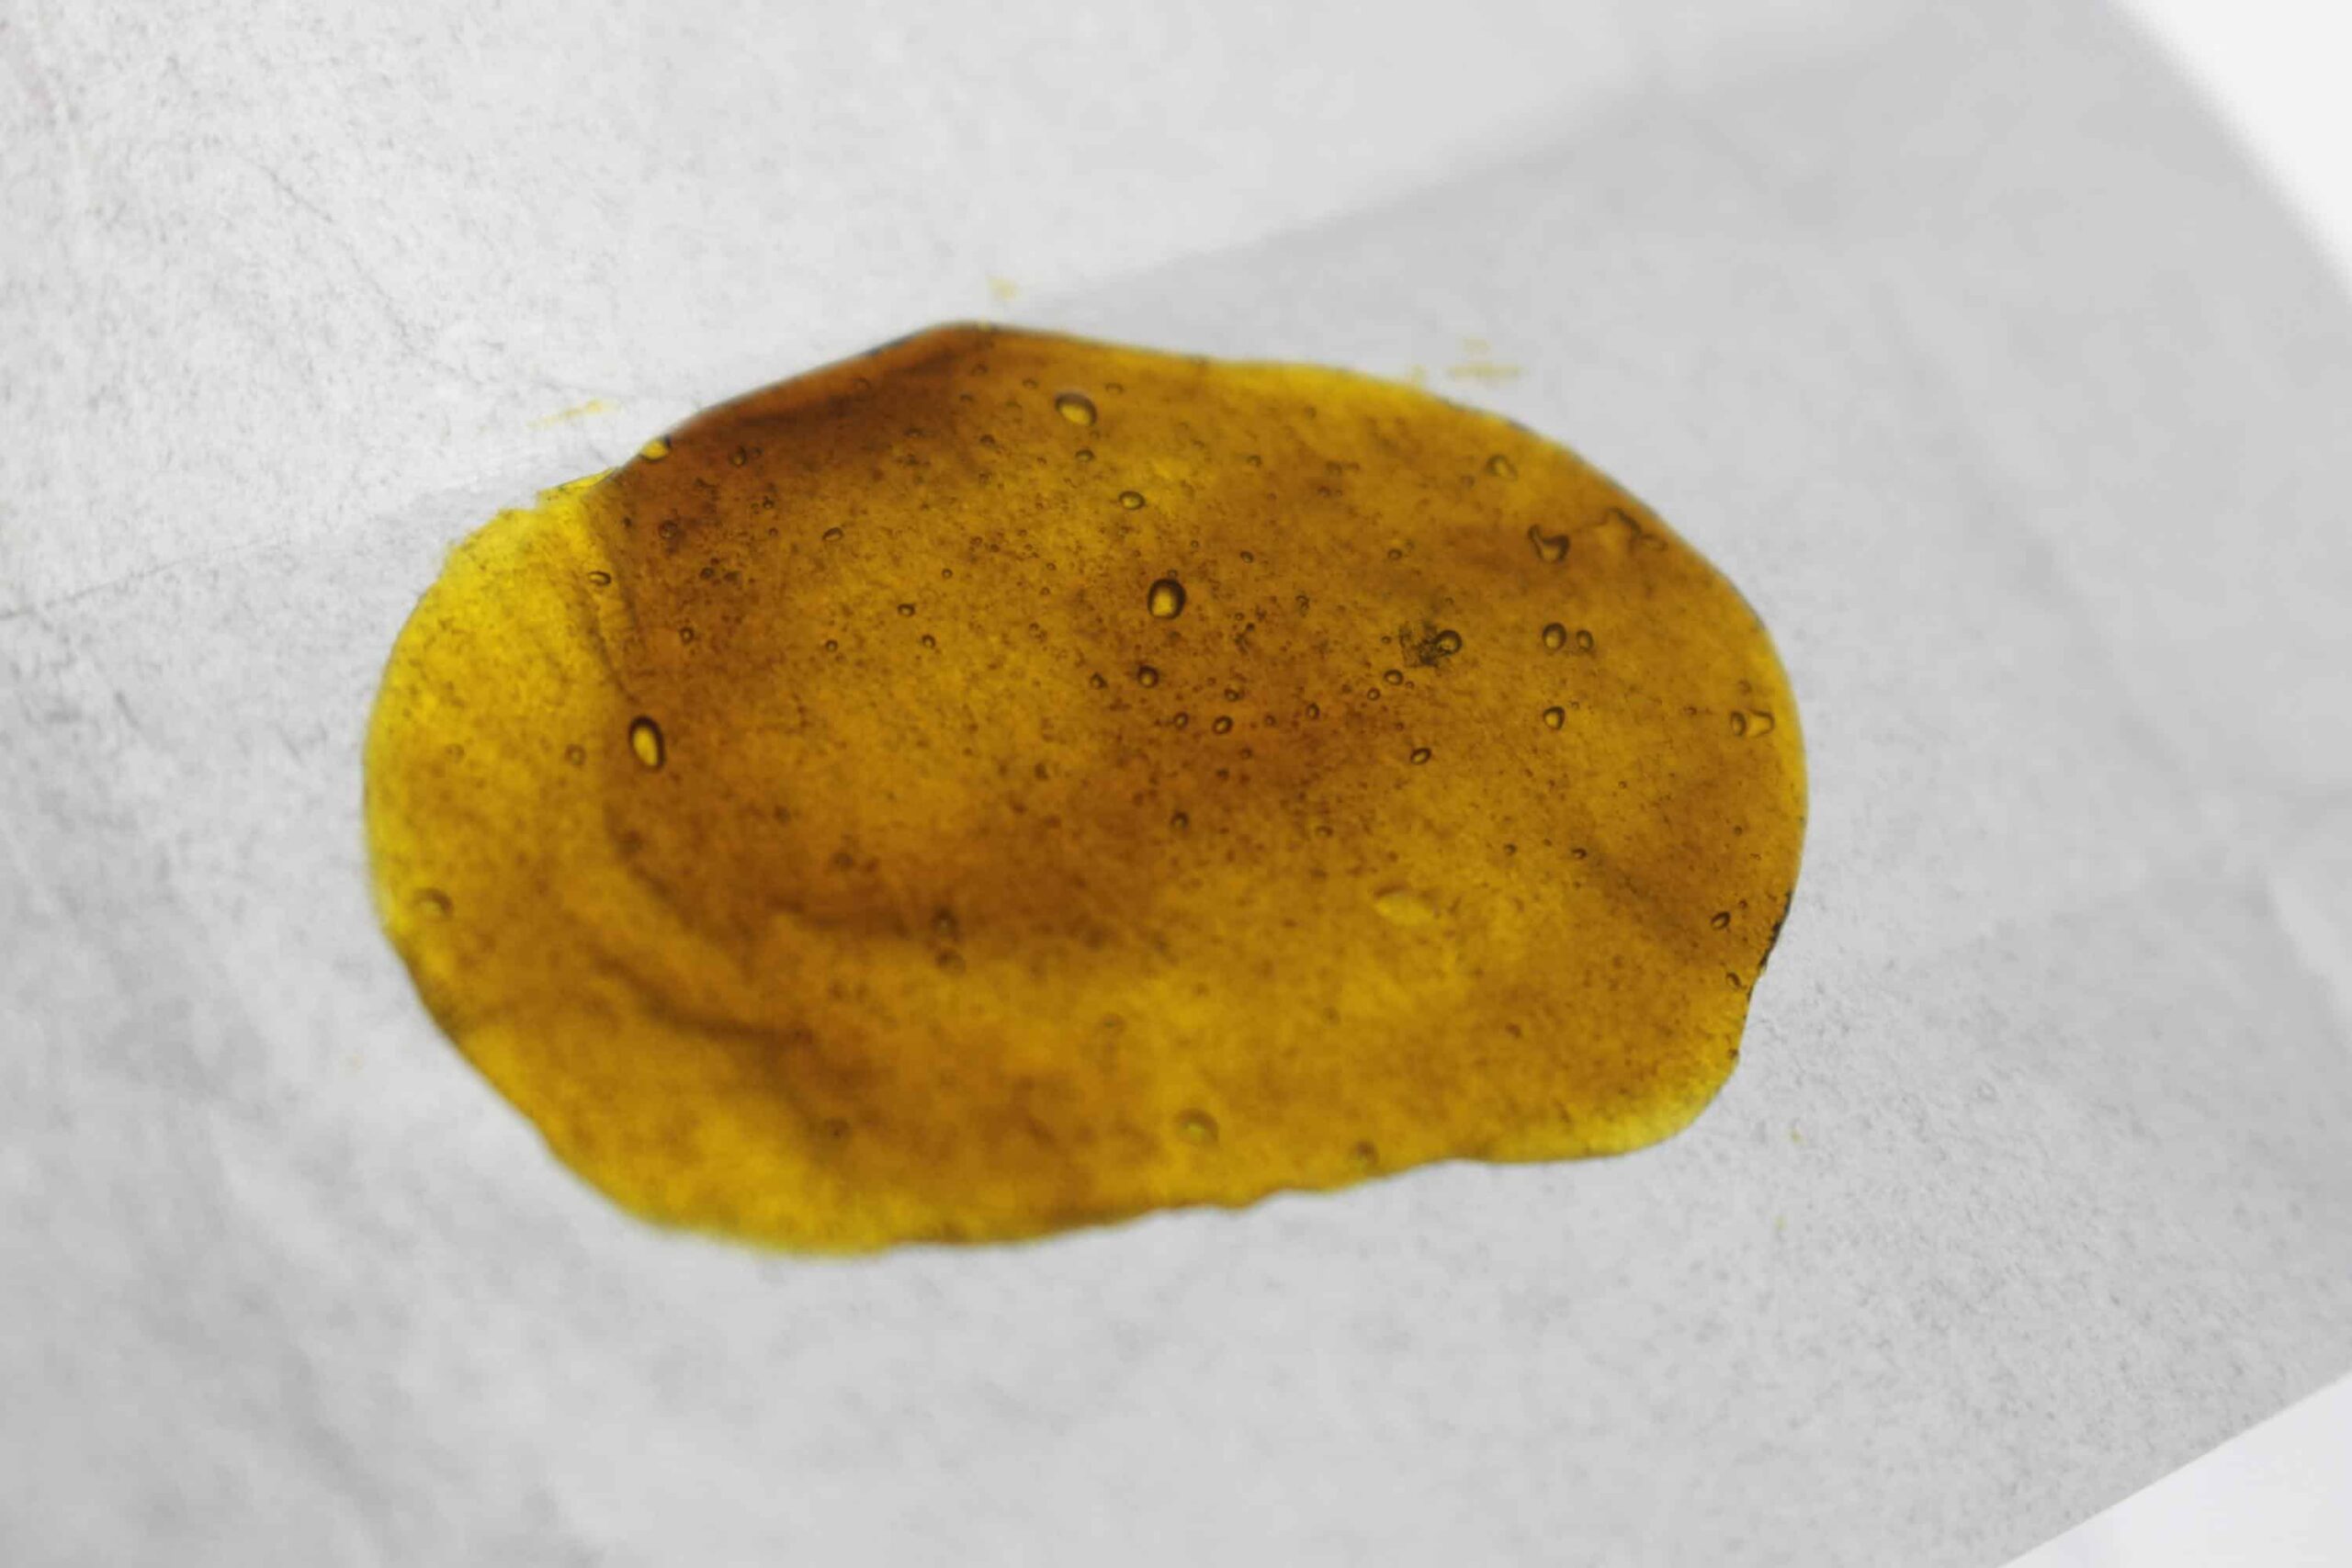 Live Resin after the flash freezing process.